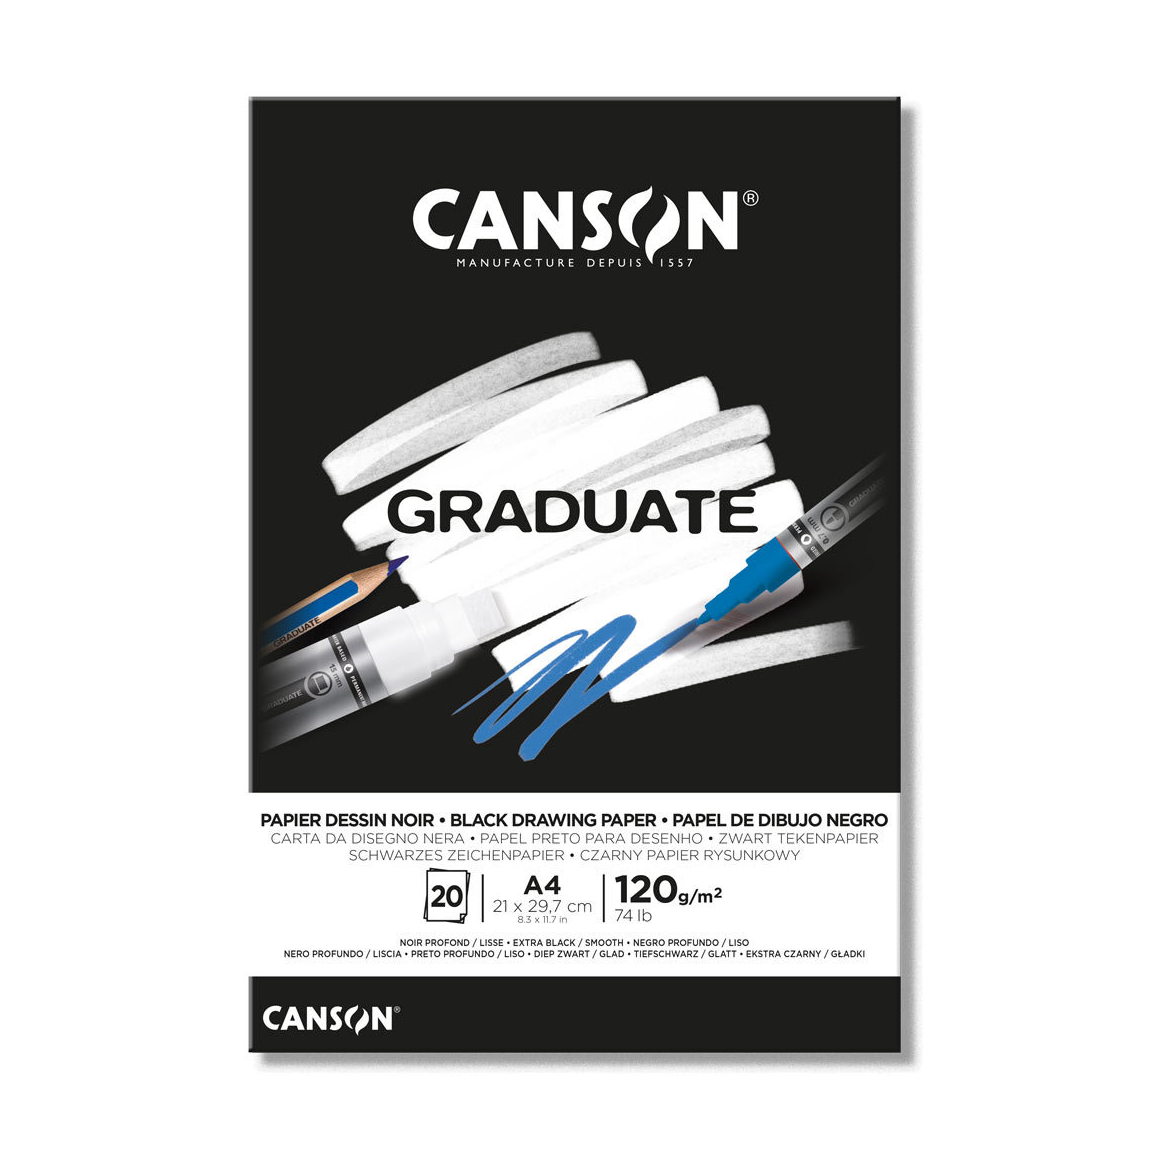 PAD CANSON PAPEL NEGRO-1